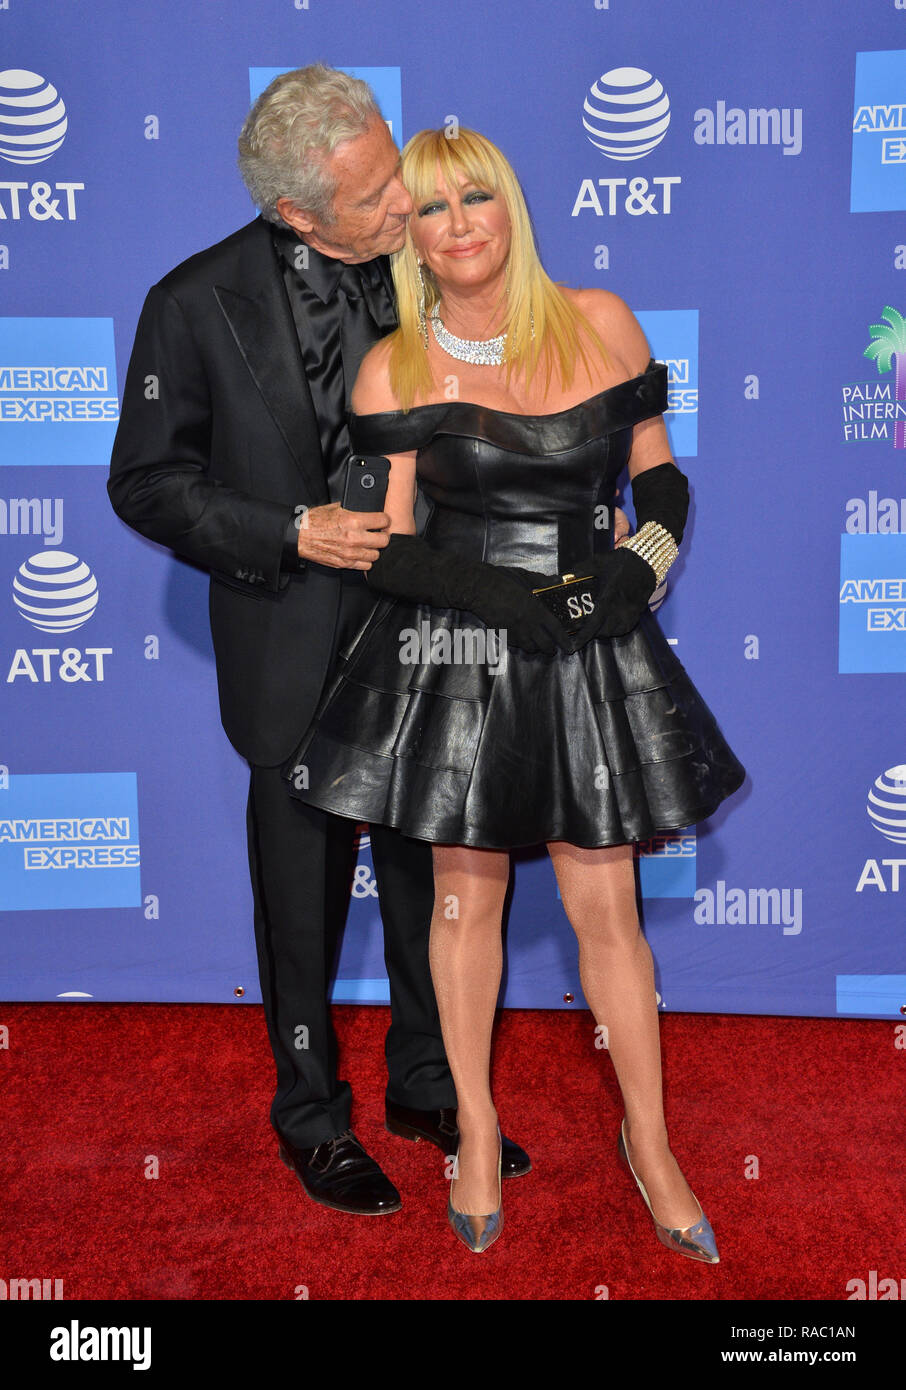 Palm Springs, California, USA. 3rd January, 2019. Suzanne Somers & Alan Hamel at the 2019 Palm Springs International Film Festival Awards. Picture: Paul Smith/Featureflash Credit: Paul Smith/Alamy Live News Stock Photo